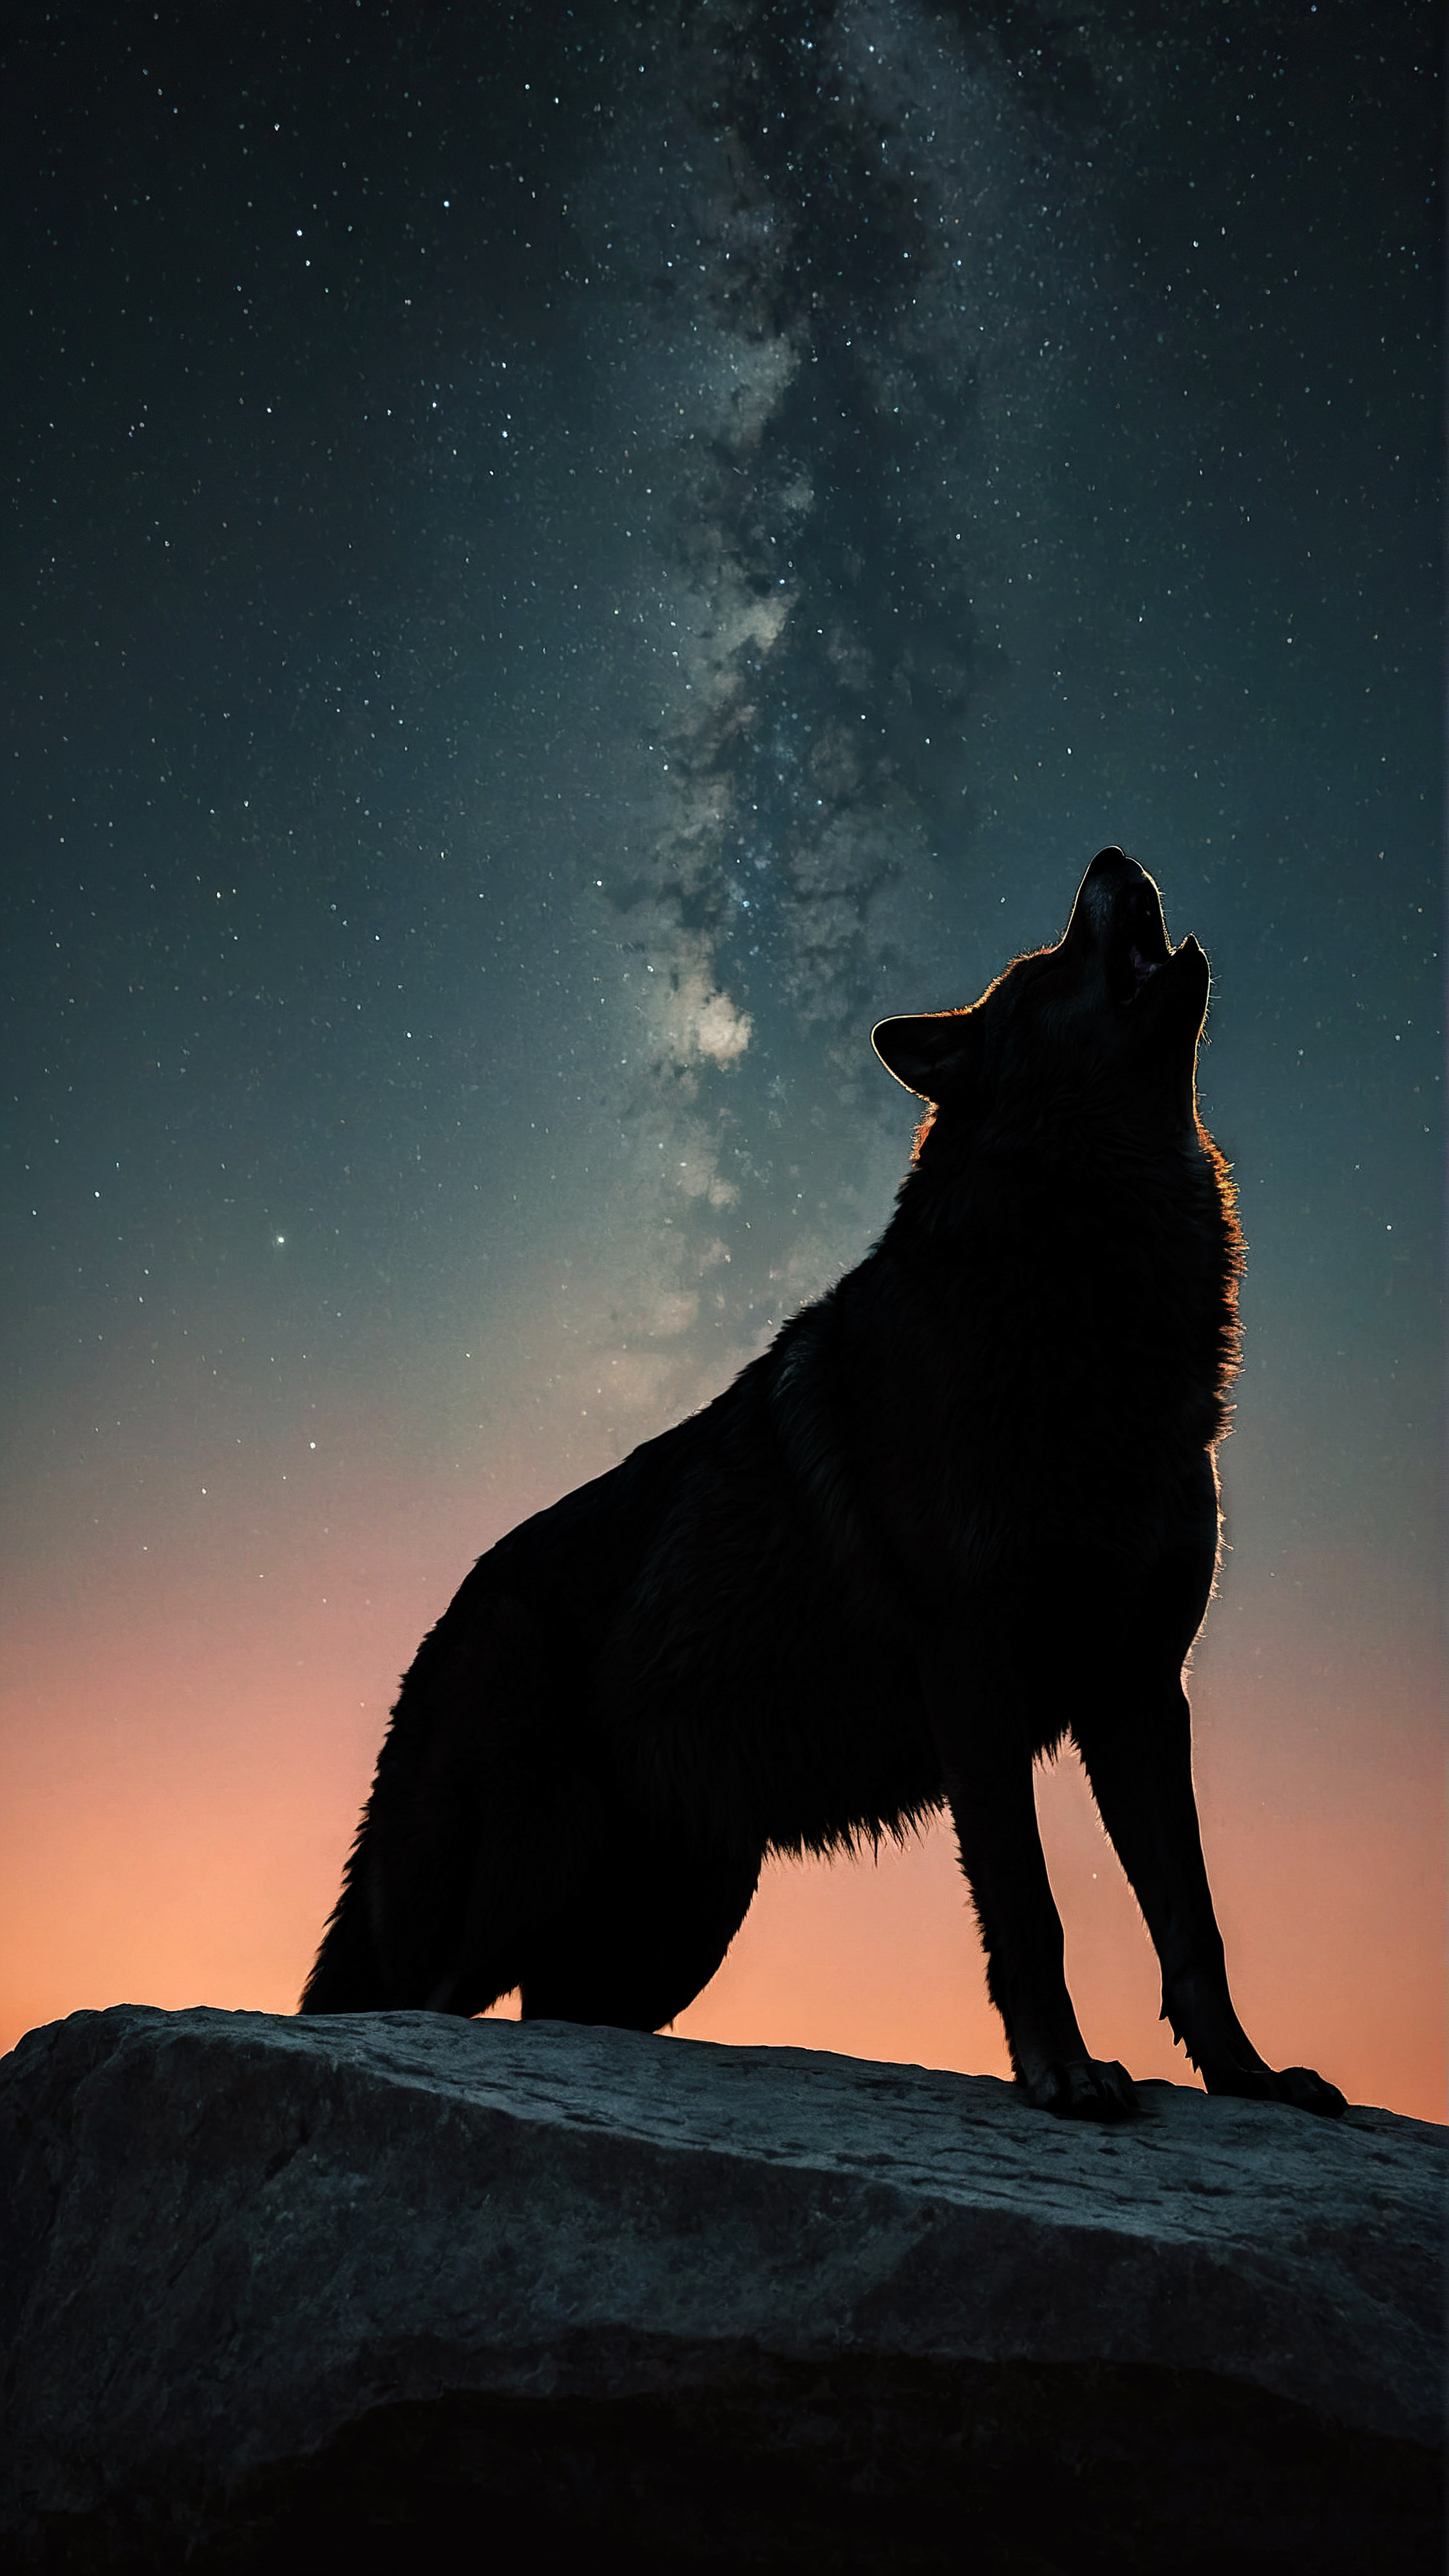 Get lost in the magic of an aesthetic lockscreen wallpaper for your iPhone, displaying an intricate celestial design with various astronomical symbols and shapes, set against a starry night sky.